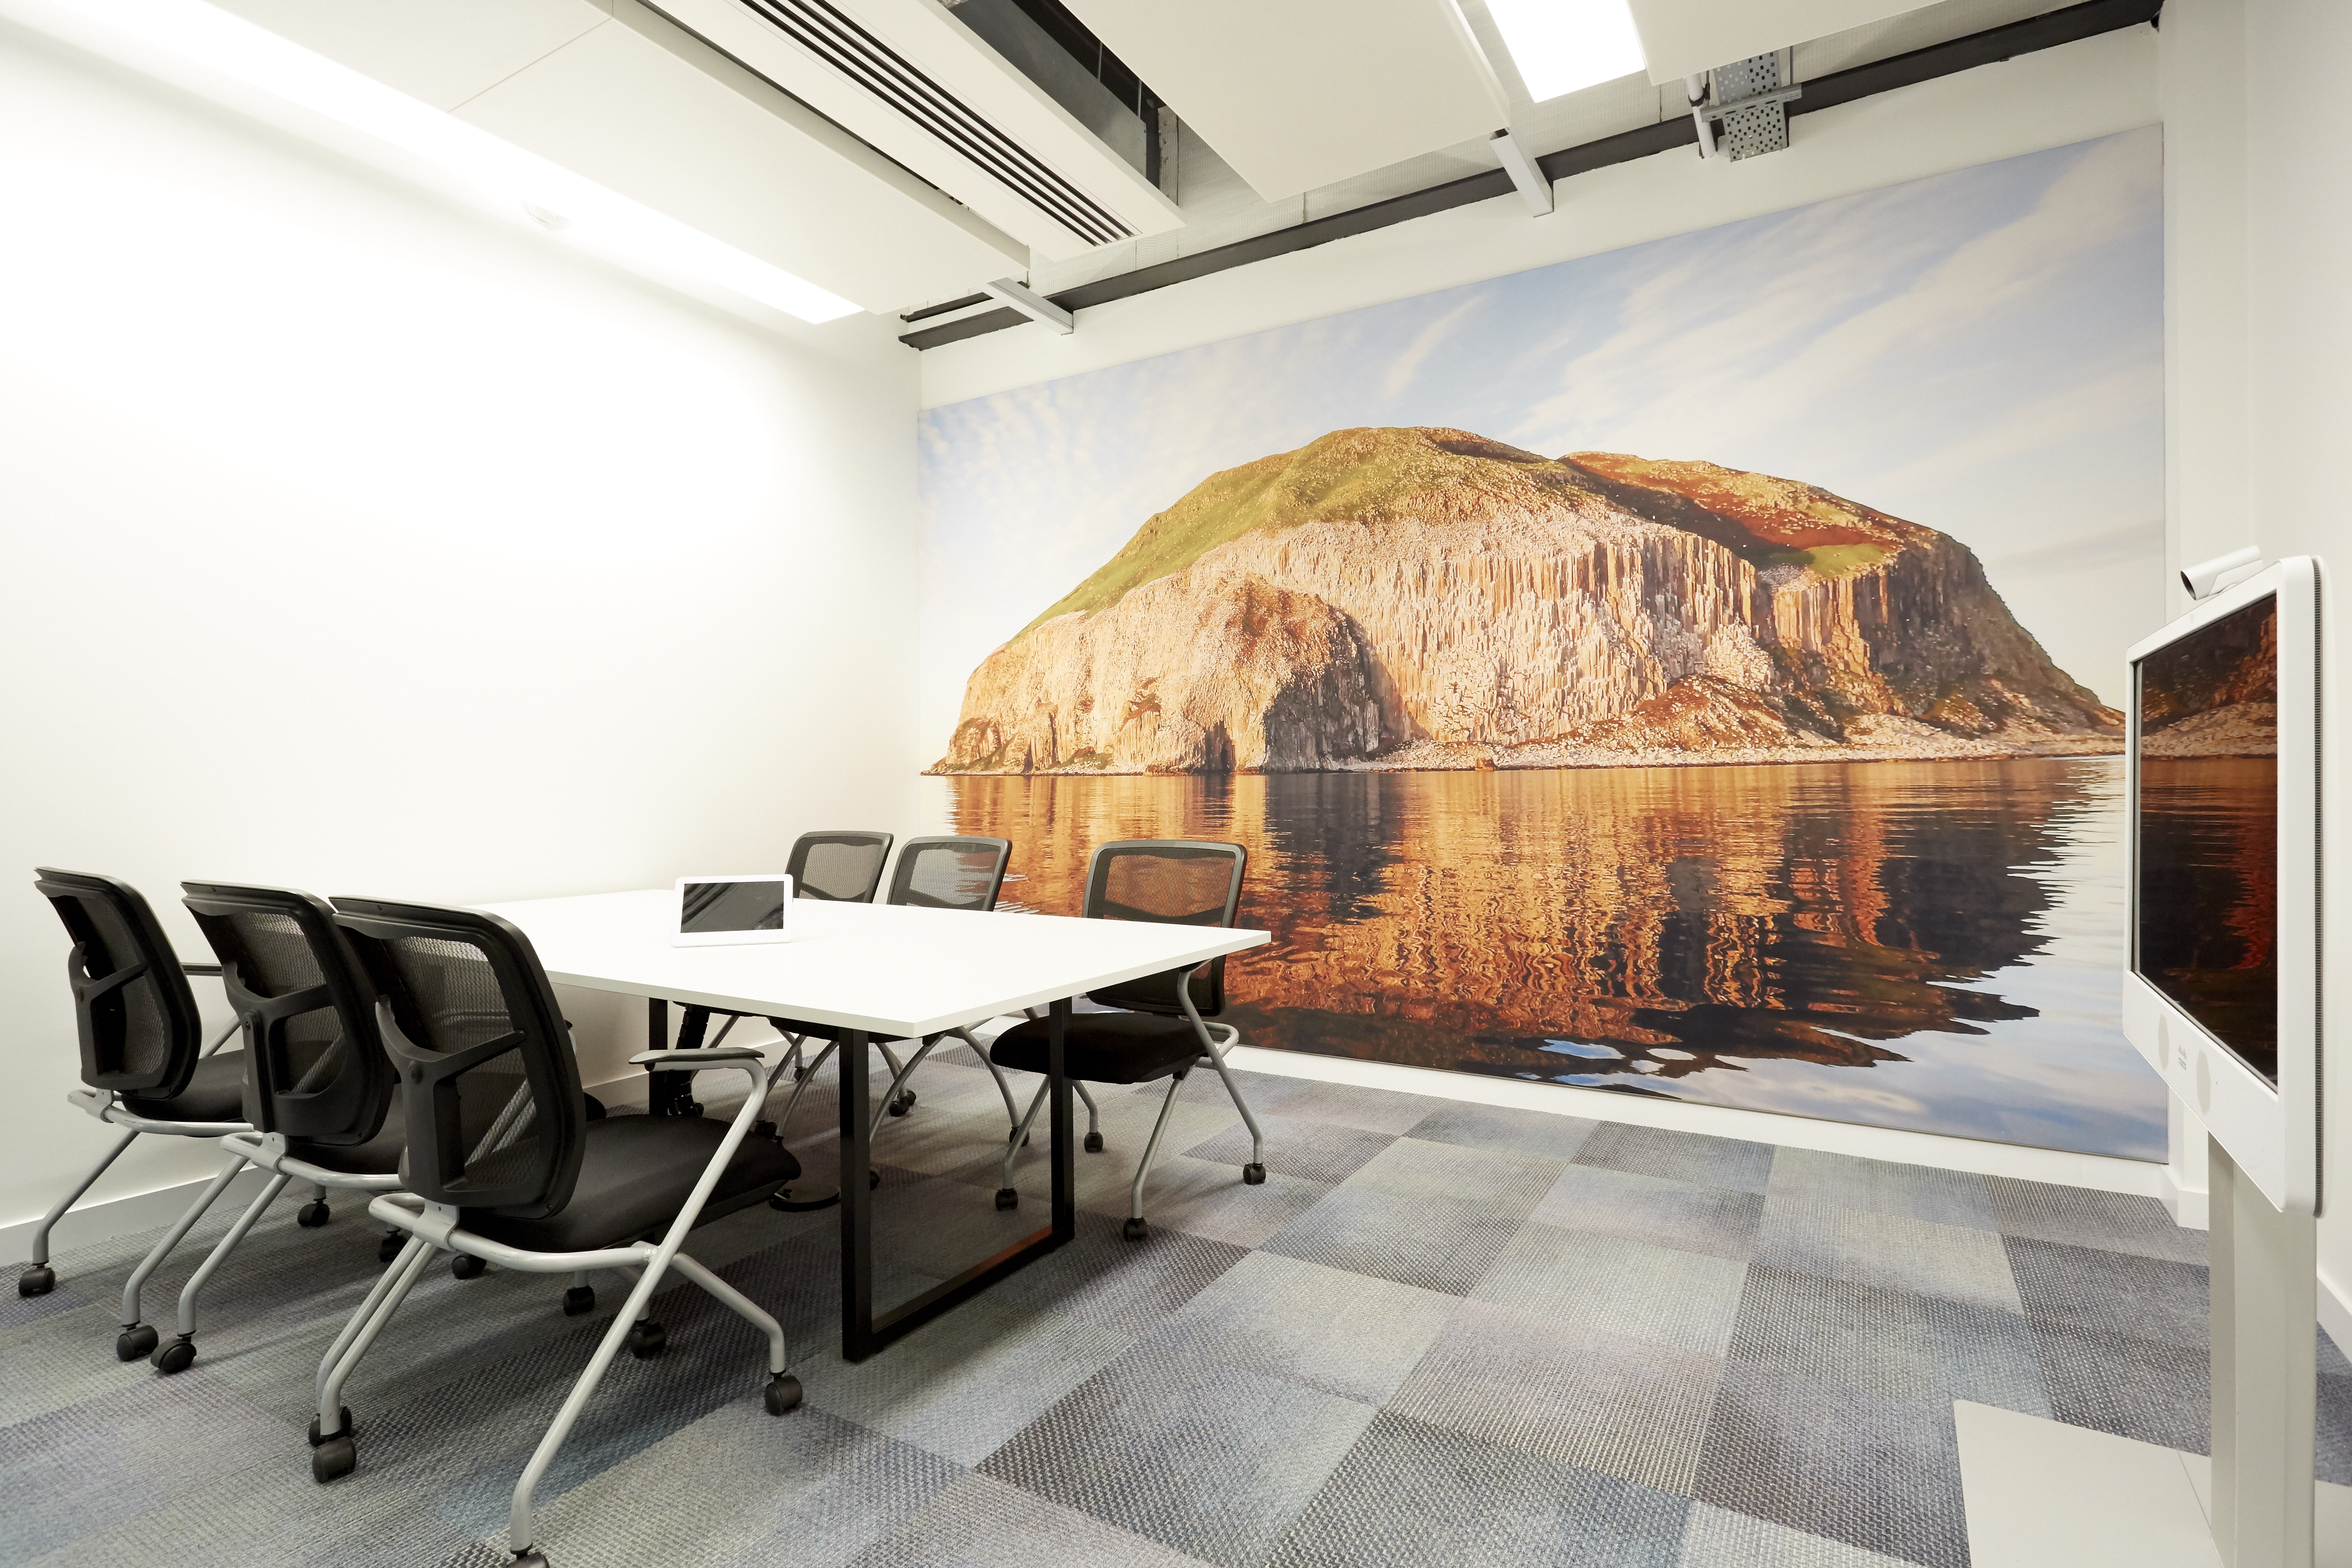 Acoustically-treated Walls and Partitions Based on a Printed Fabric Solution